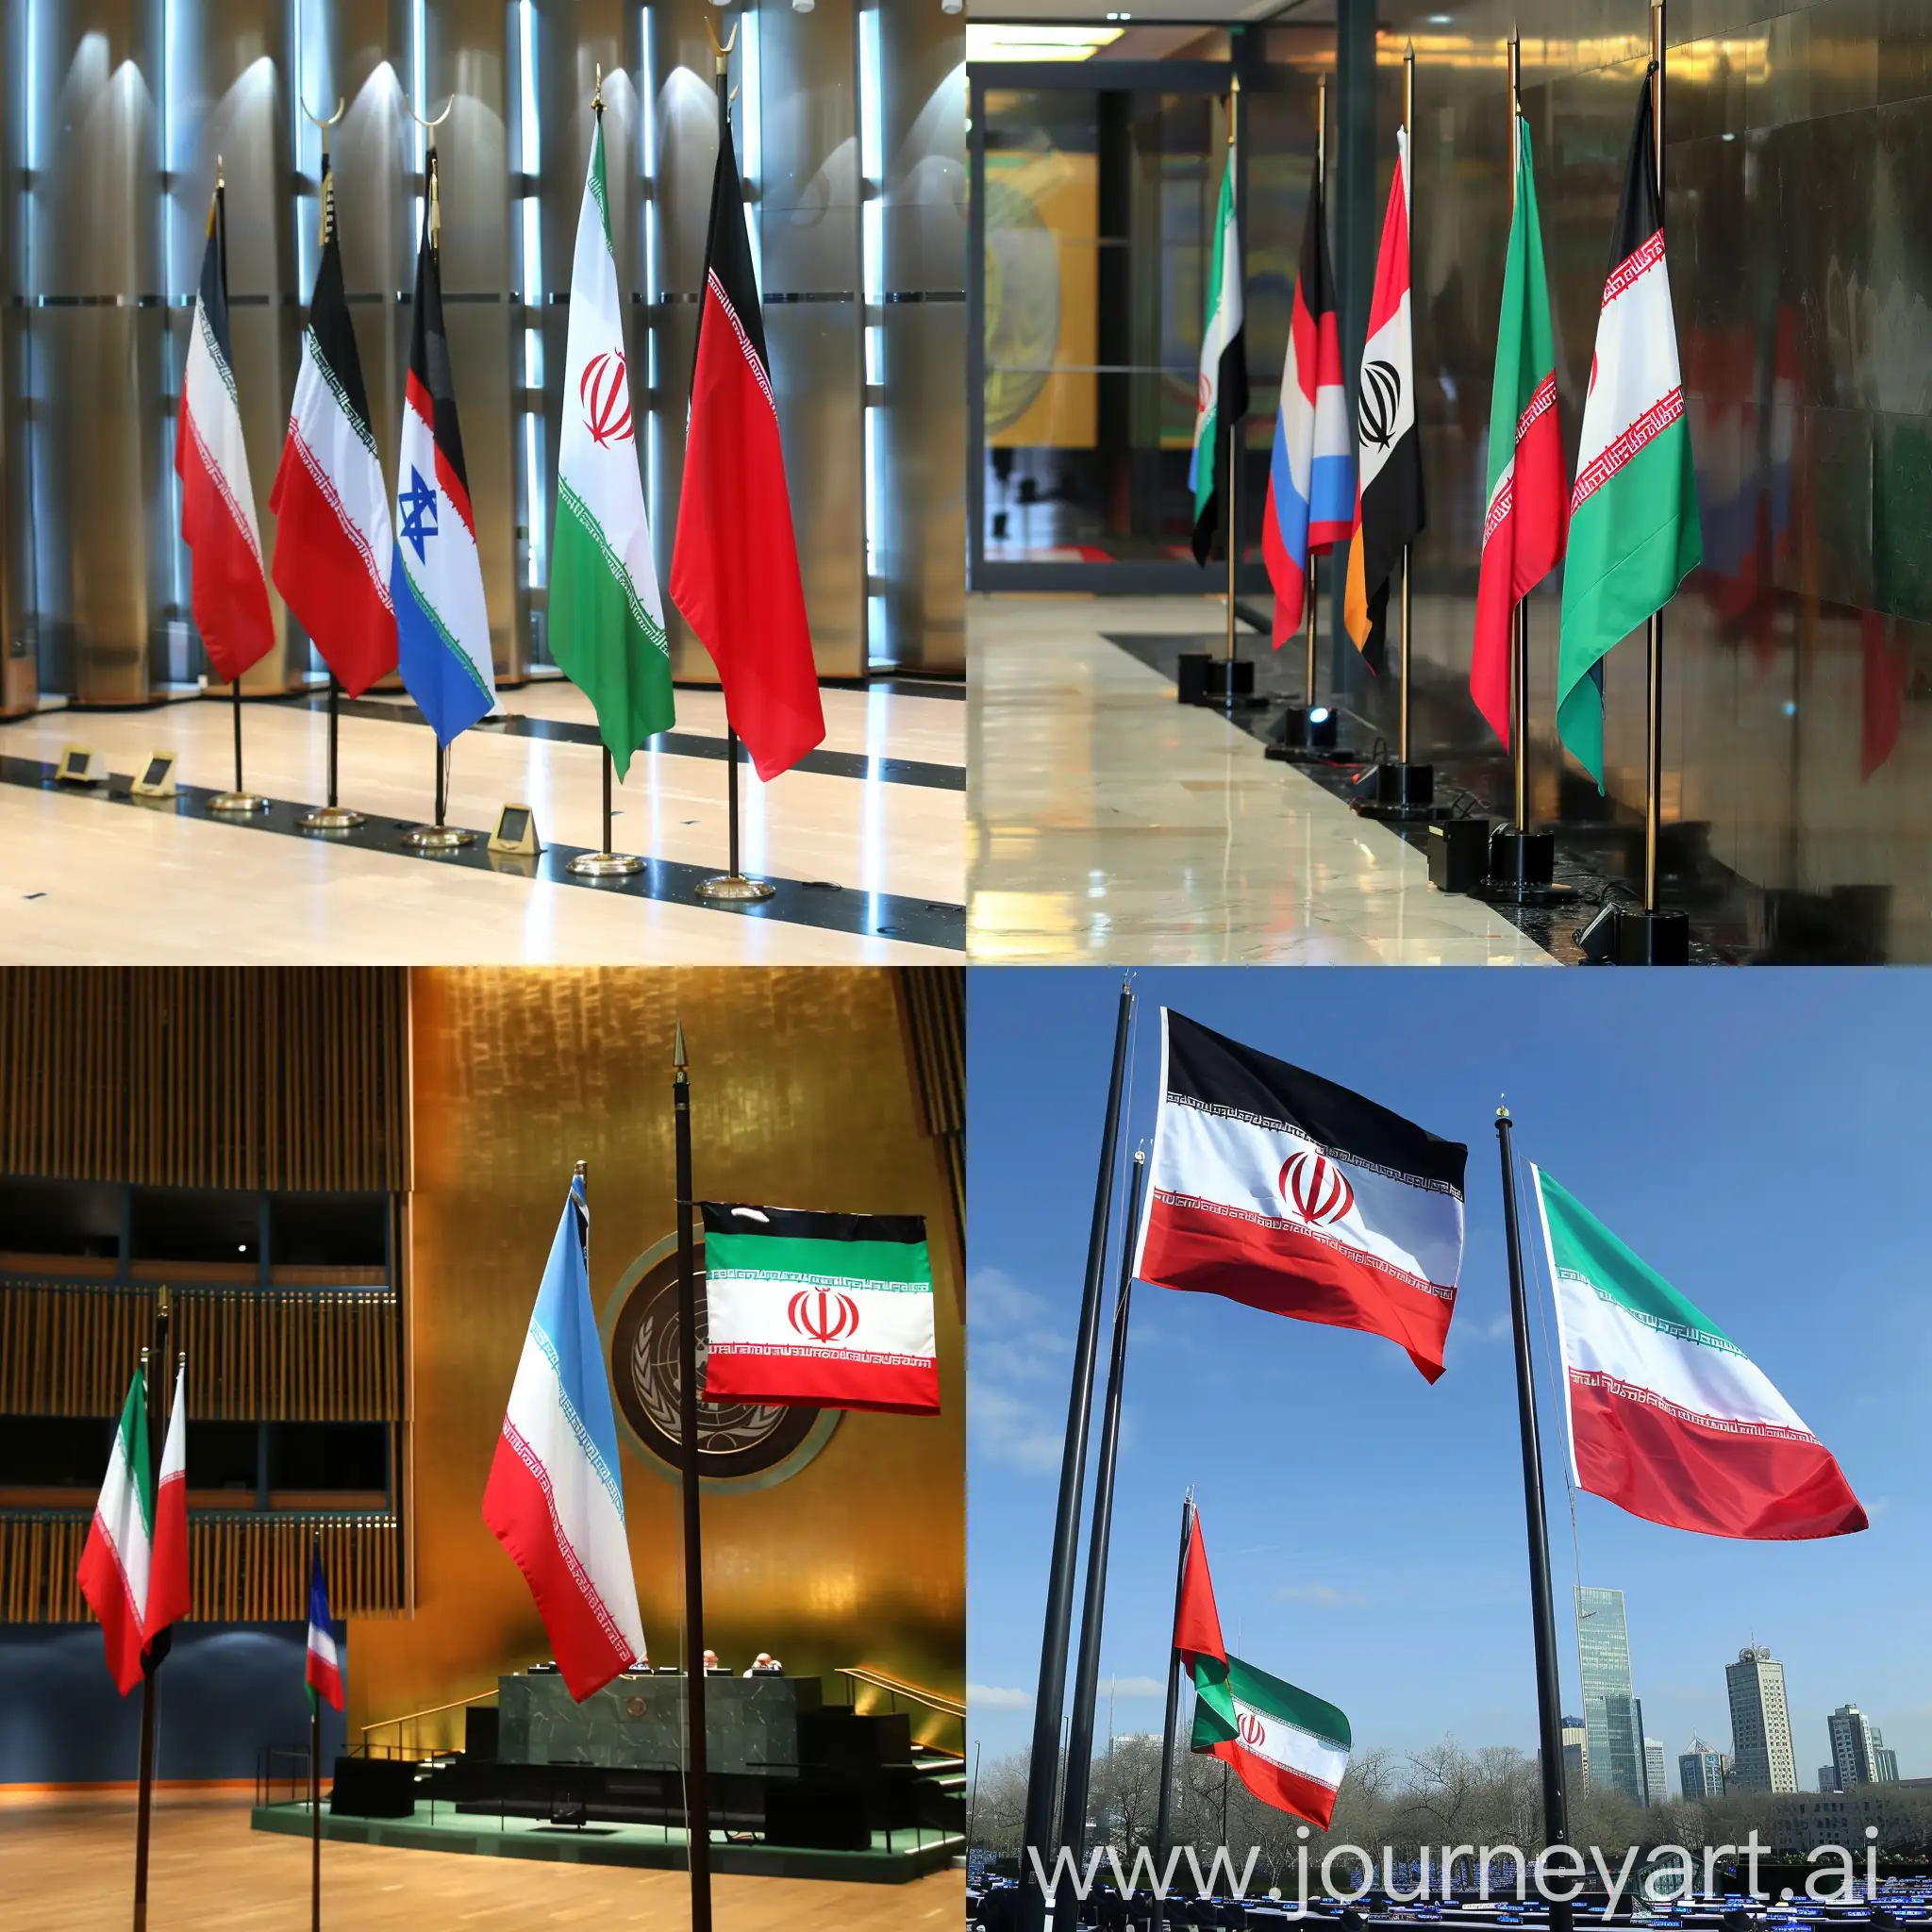 The flag of Palestine next to the flag of Iran in the United Nations next to the flags of other countries